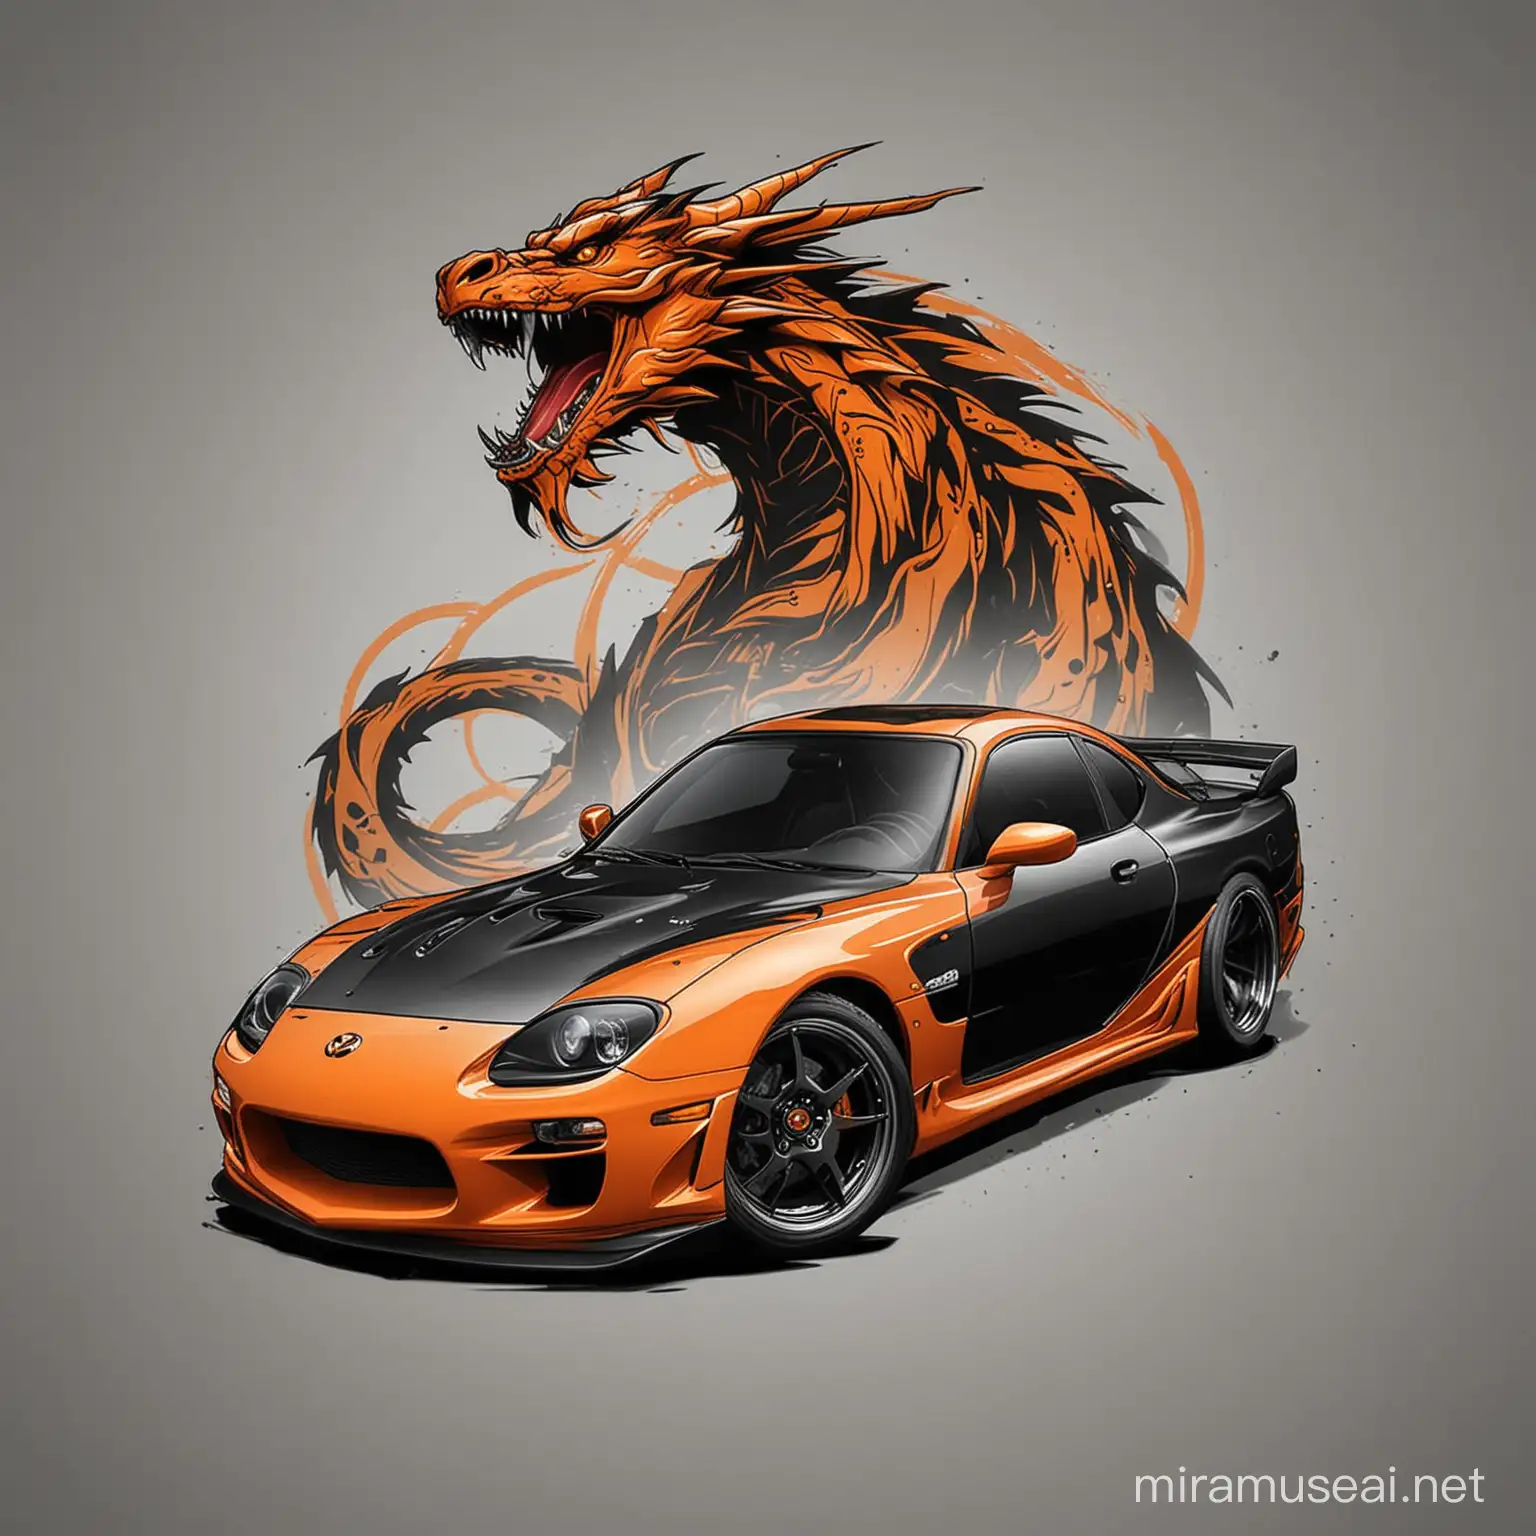 give me a car build of a black and orange mazda RX-7 with an outline of a dragon face in the background; so I can design it to put on a t-shirt